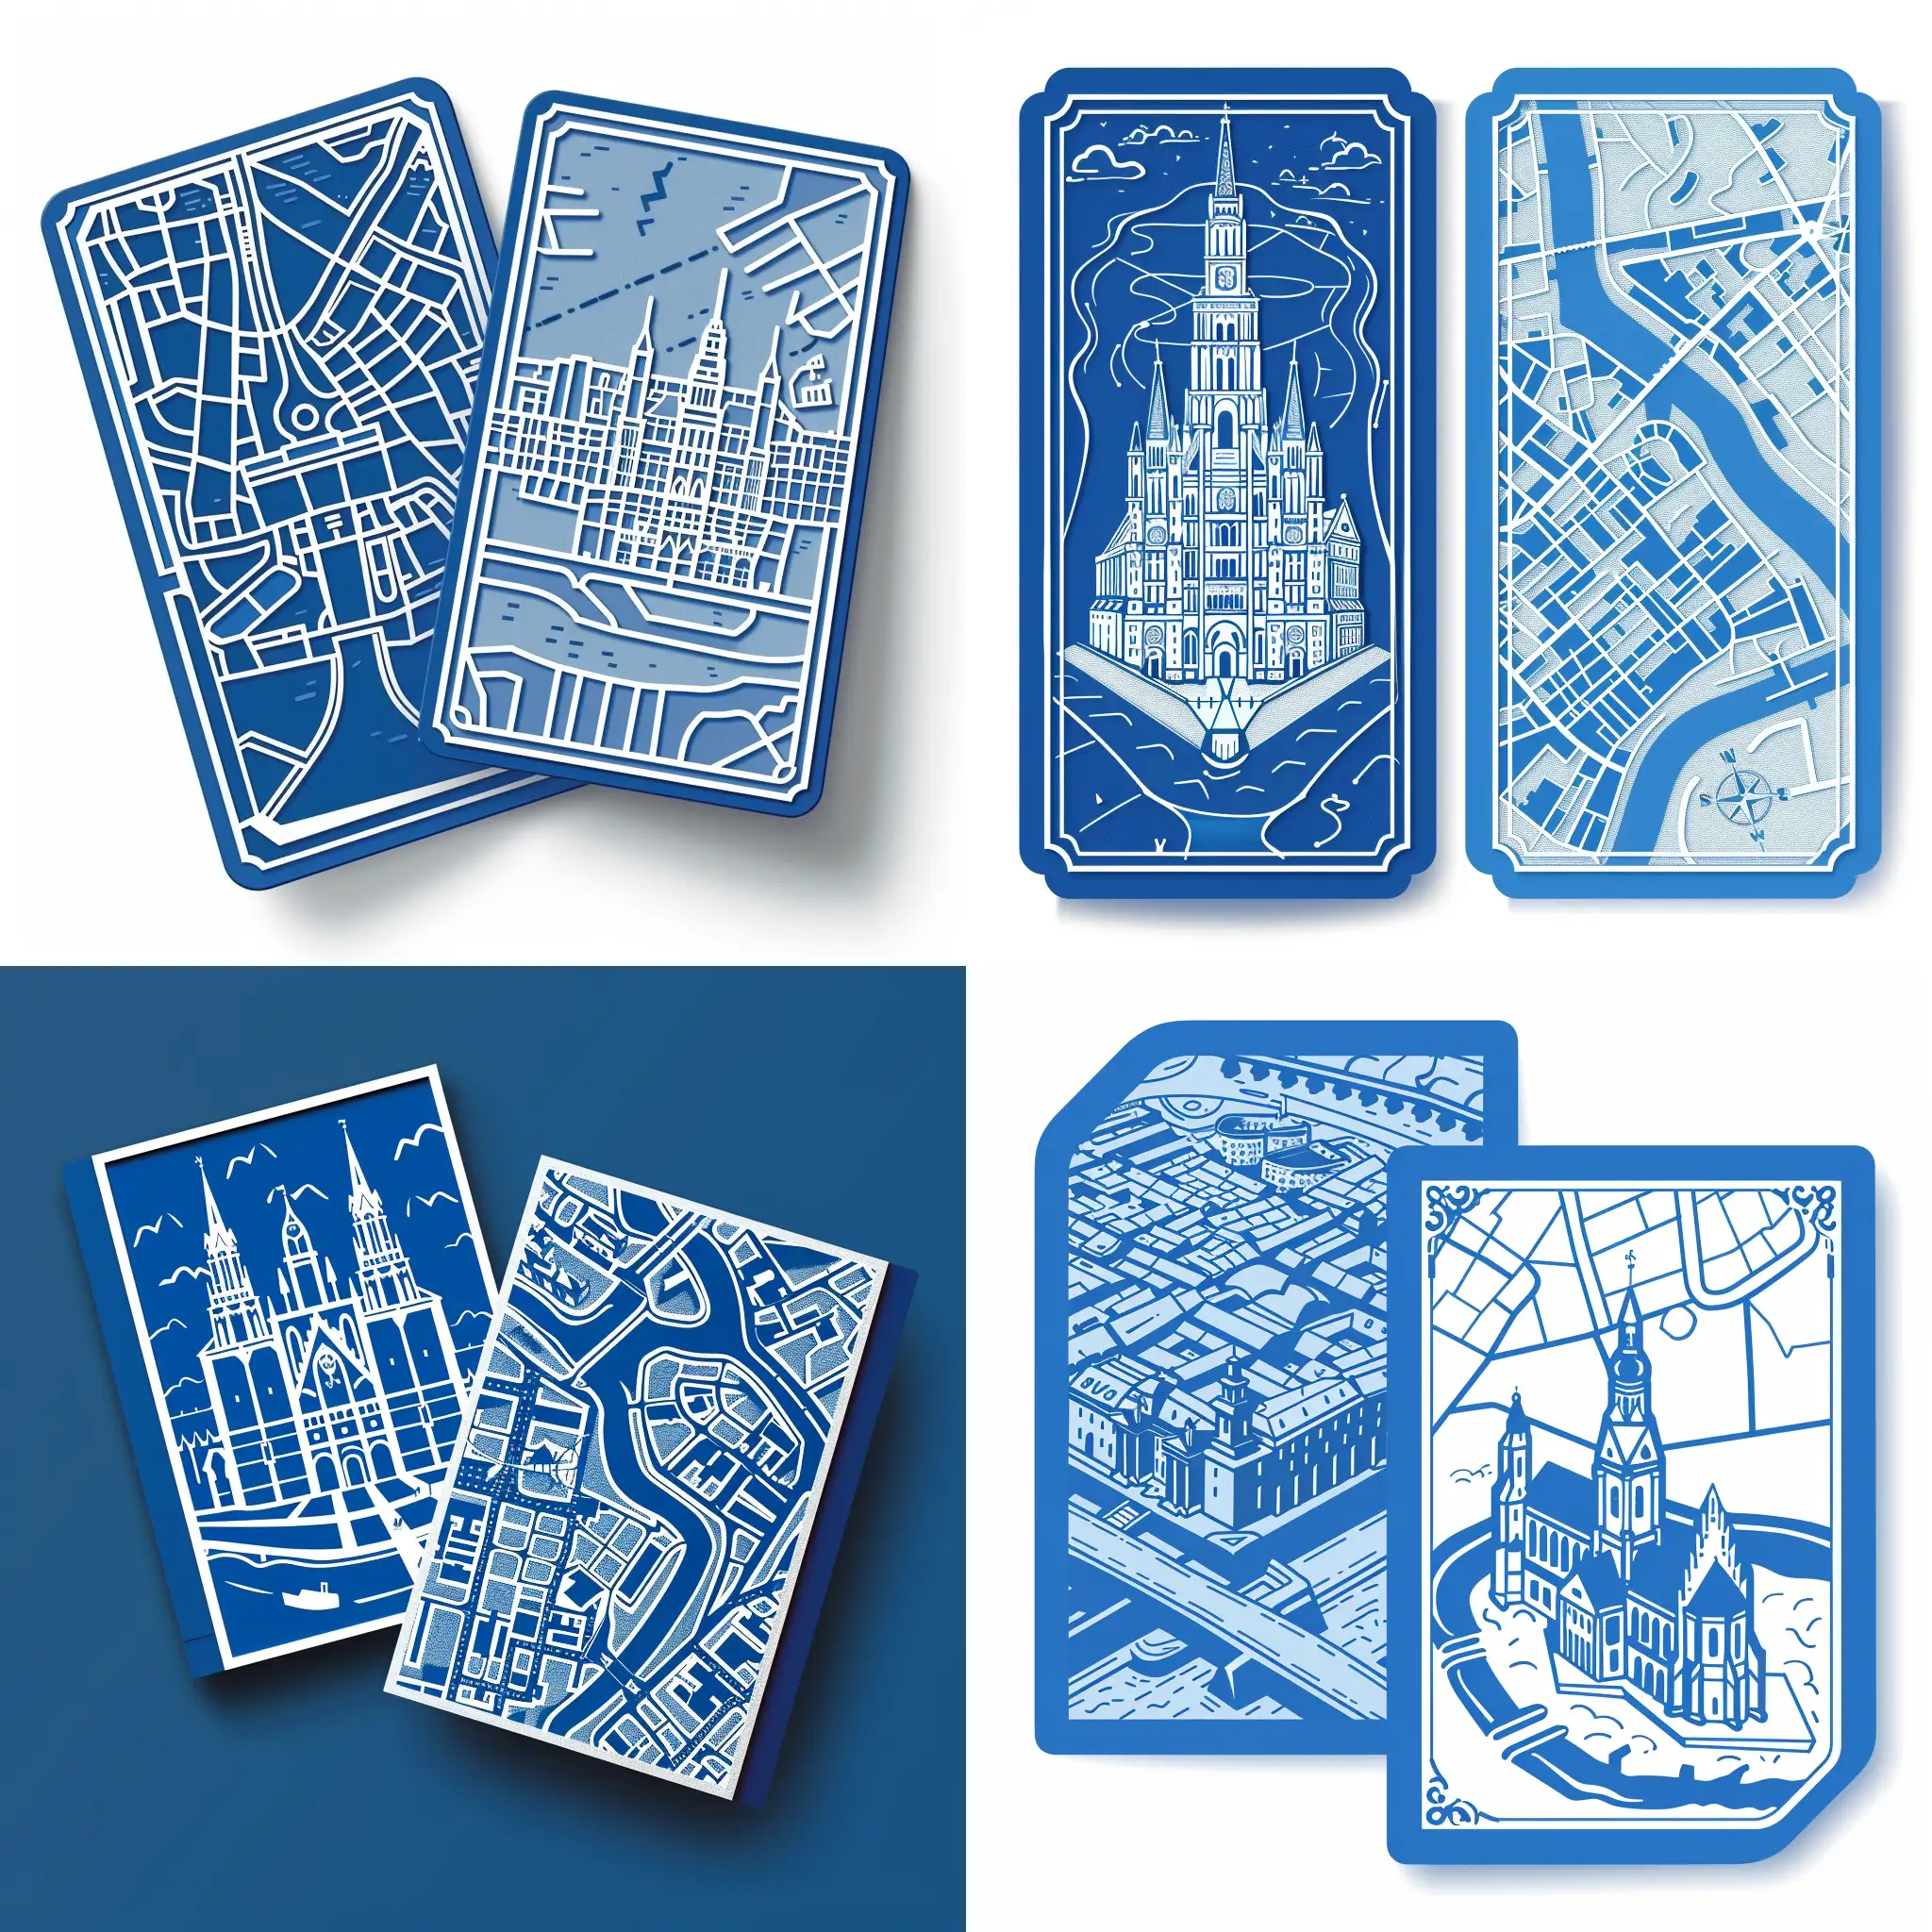 Create two colors blue and white city game logo in Wroclaw. Logo should look as a game card with map and famouse building in Wroclaw. Everything should be as one logo grapic.